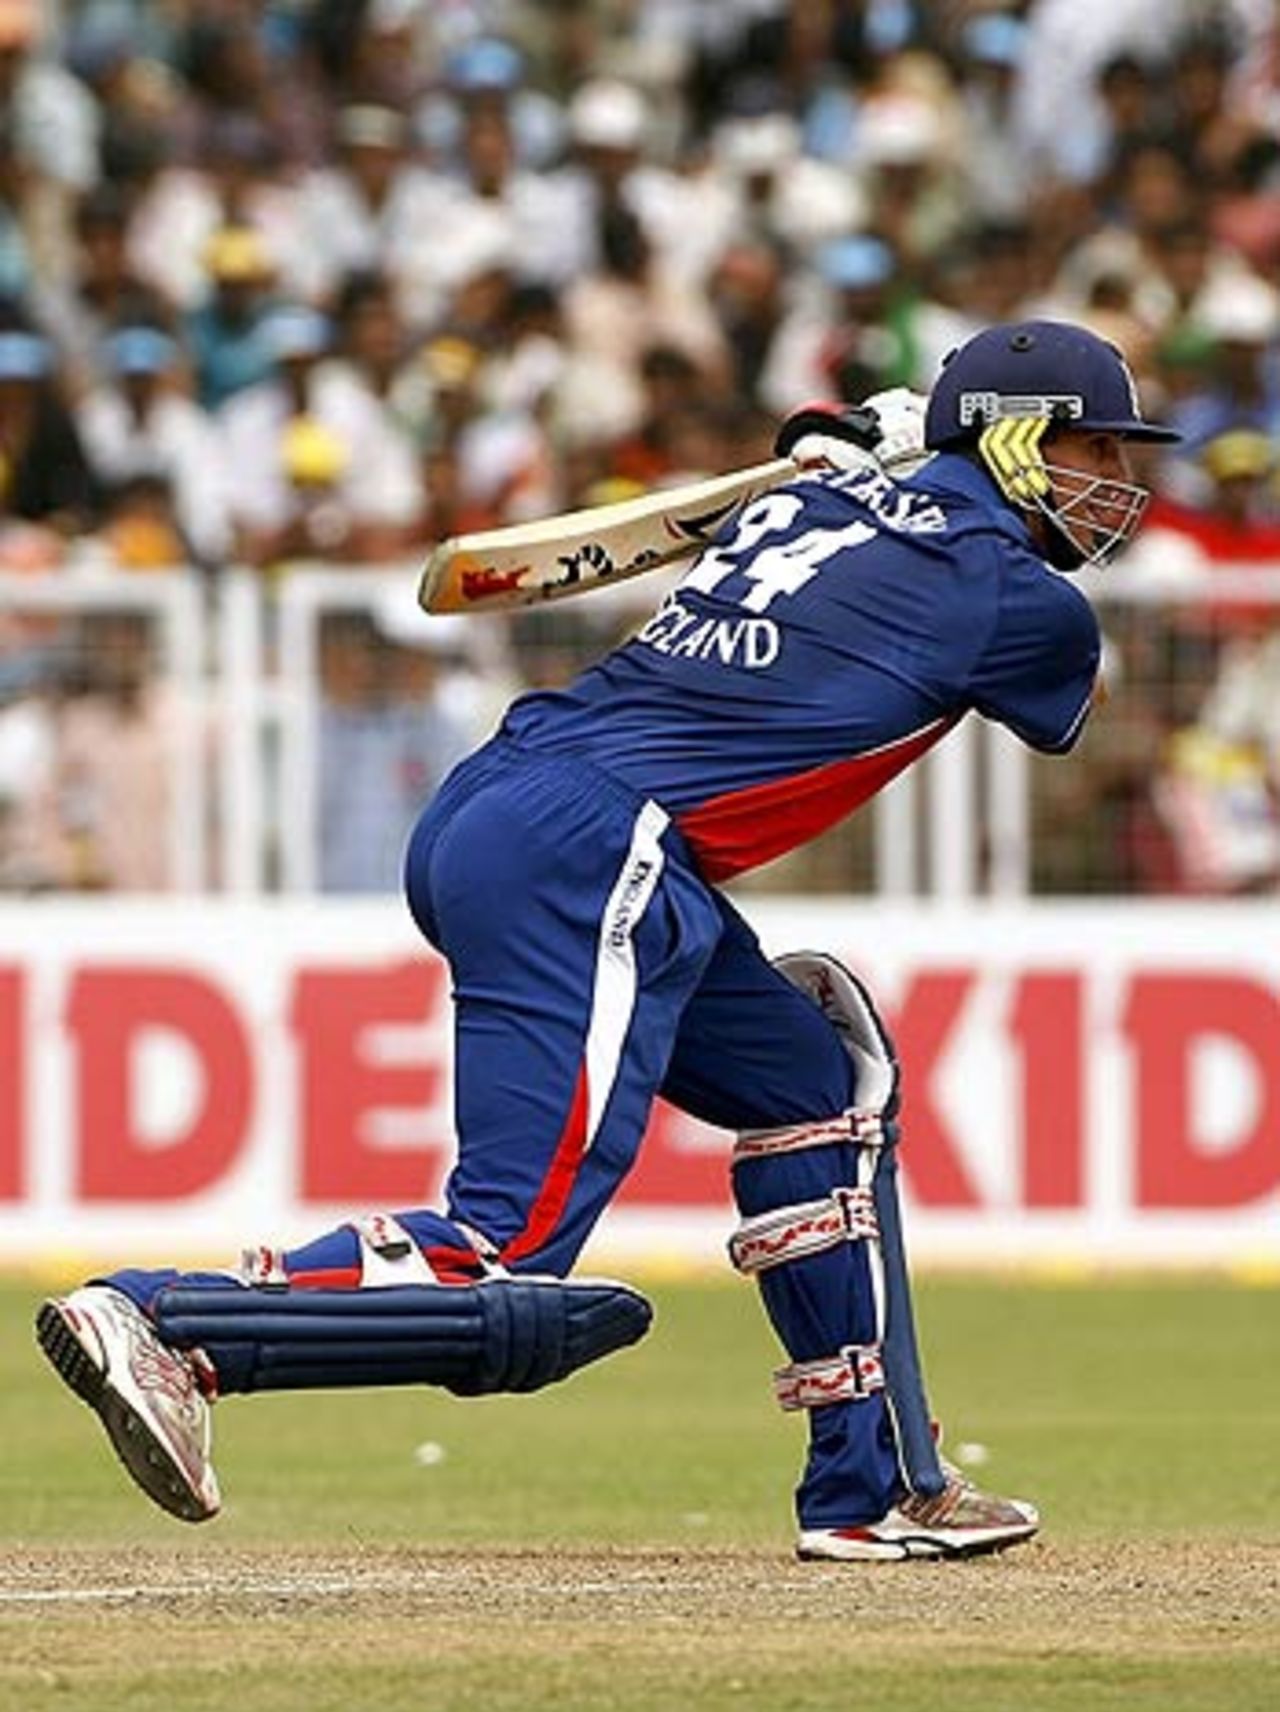 Kevin Pietersen drives to go past fifty, India v England, 2nd ODI, Faridabad, March 31, 2006